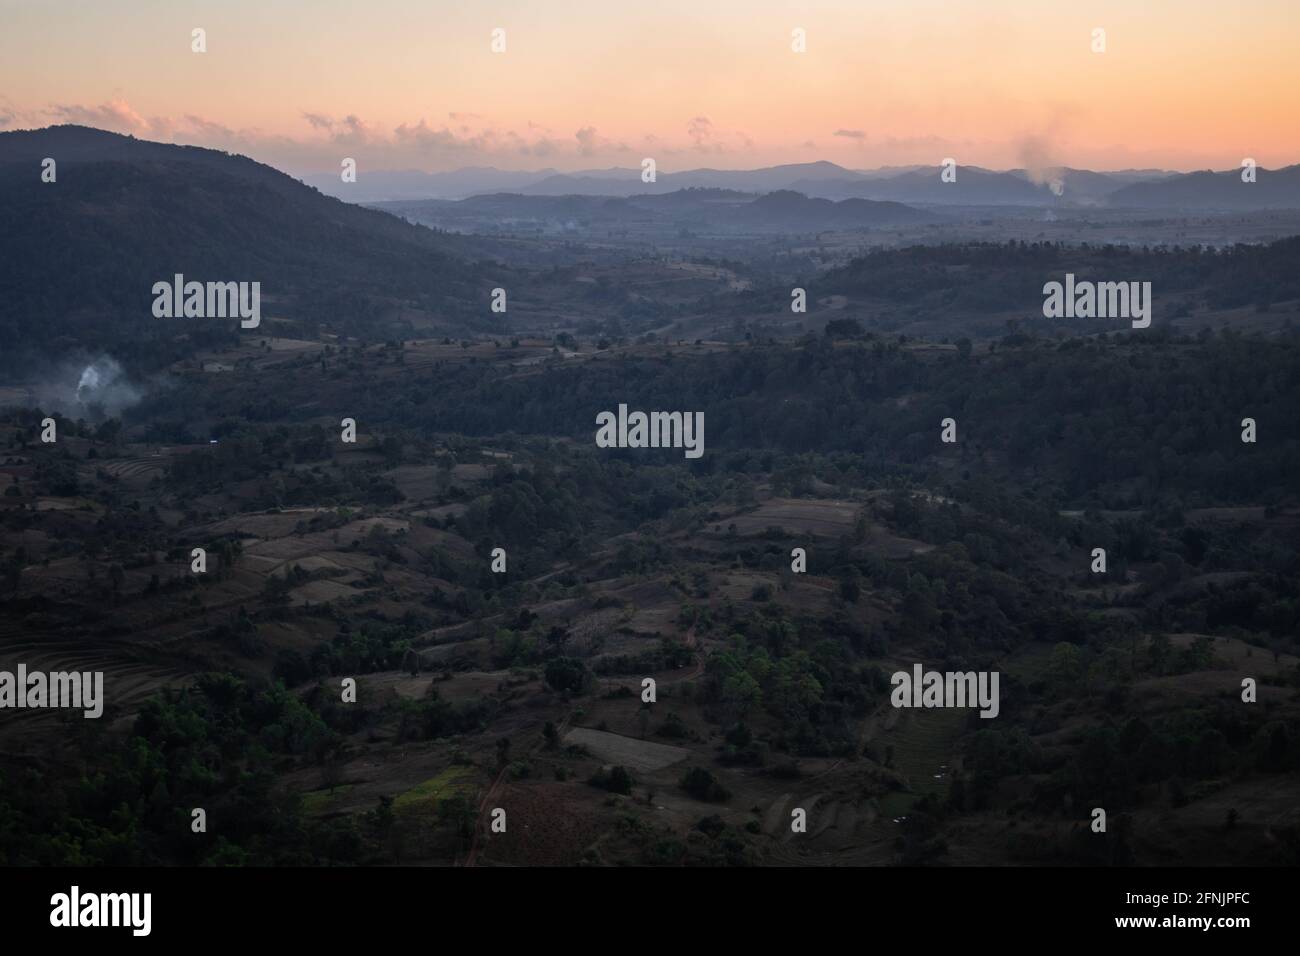 Orange sunset from a viewpoint looking out over the farm lands and hills underneath in a valley between Kalaw and Inle Lake, Shan state, Myanmar Stock Photo